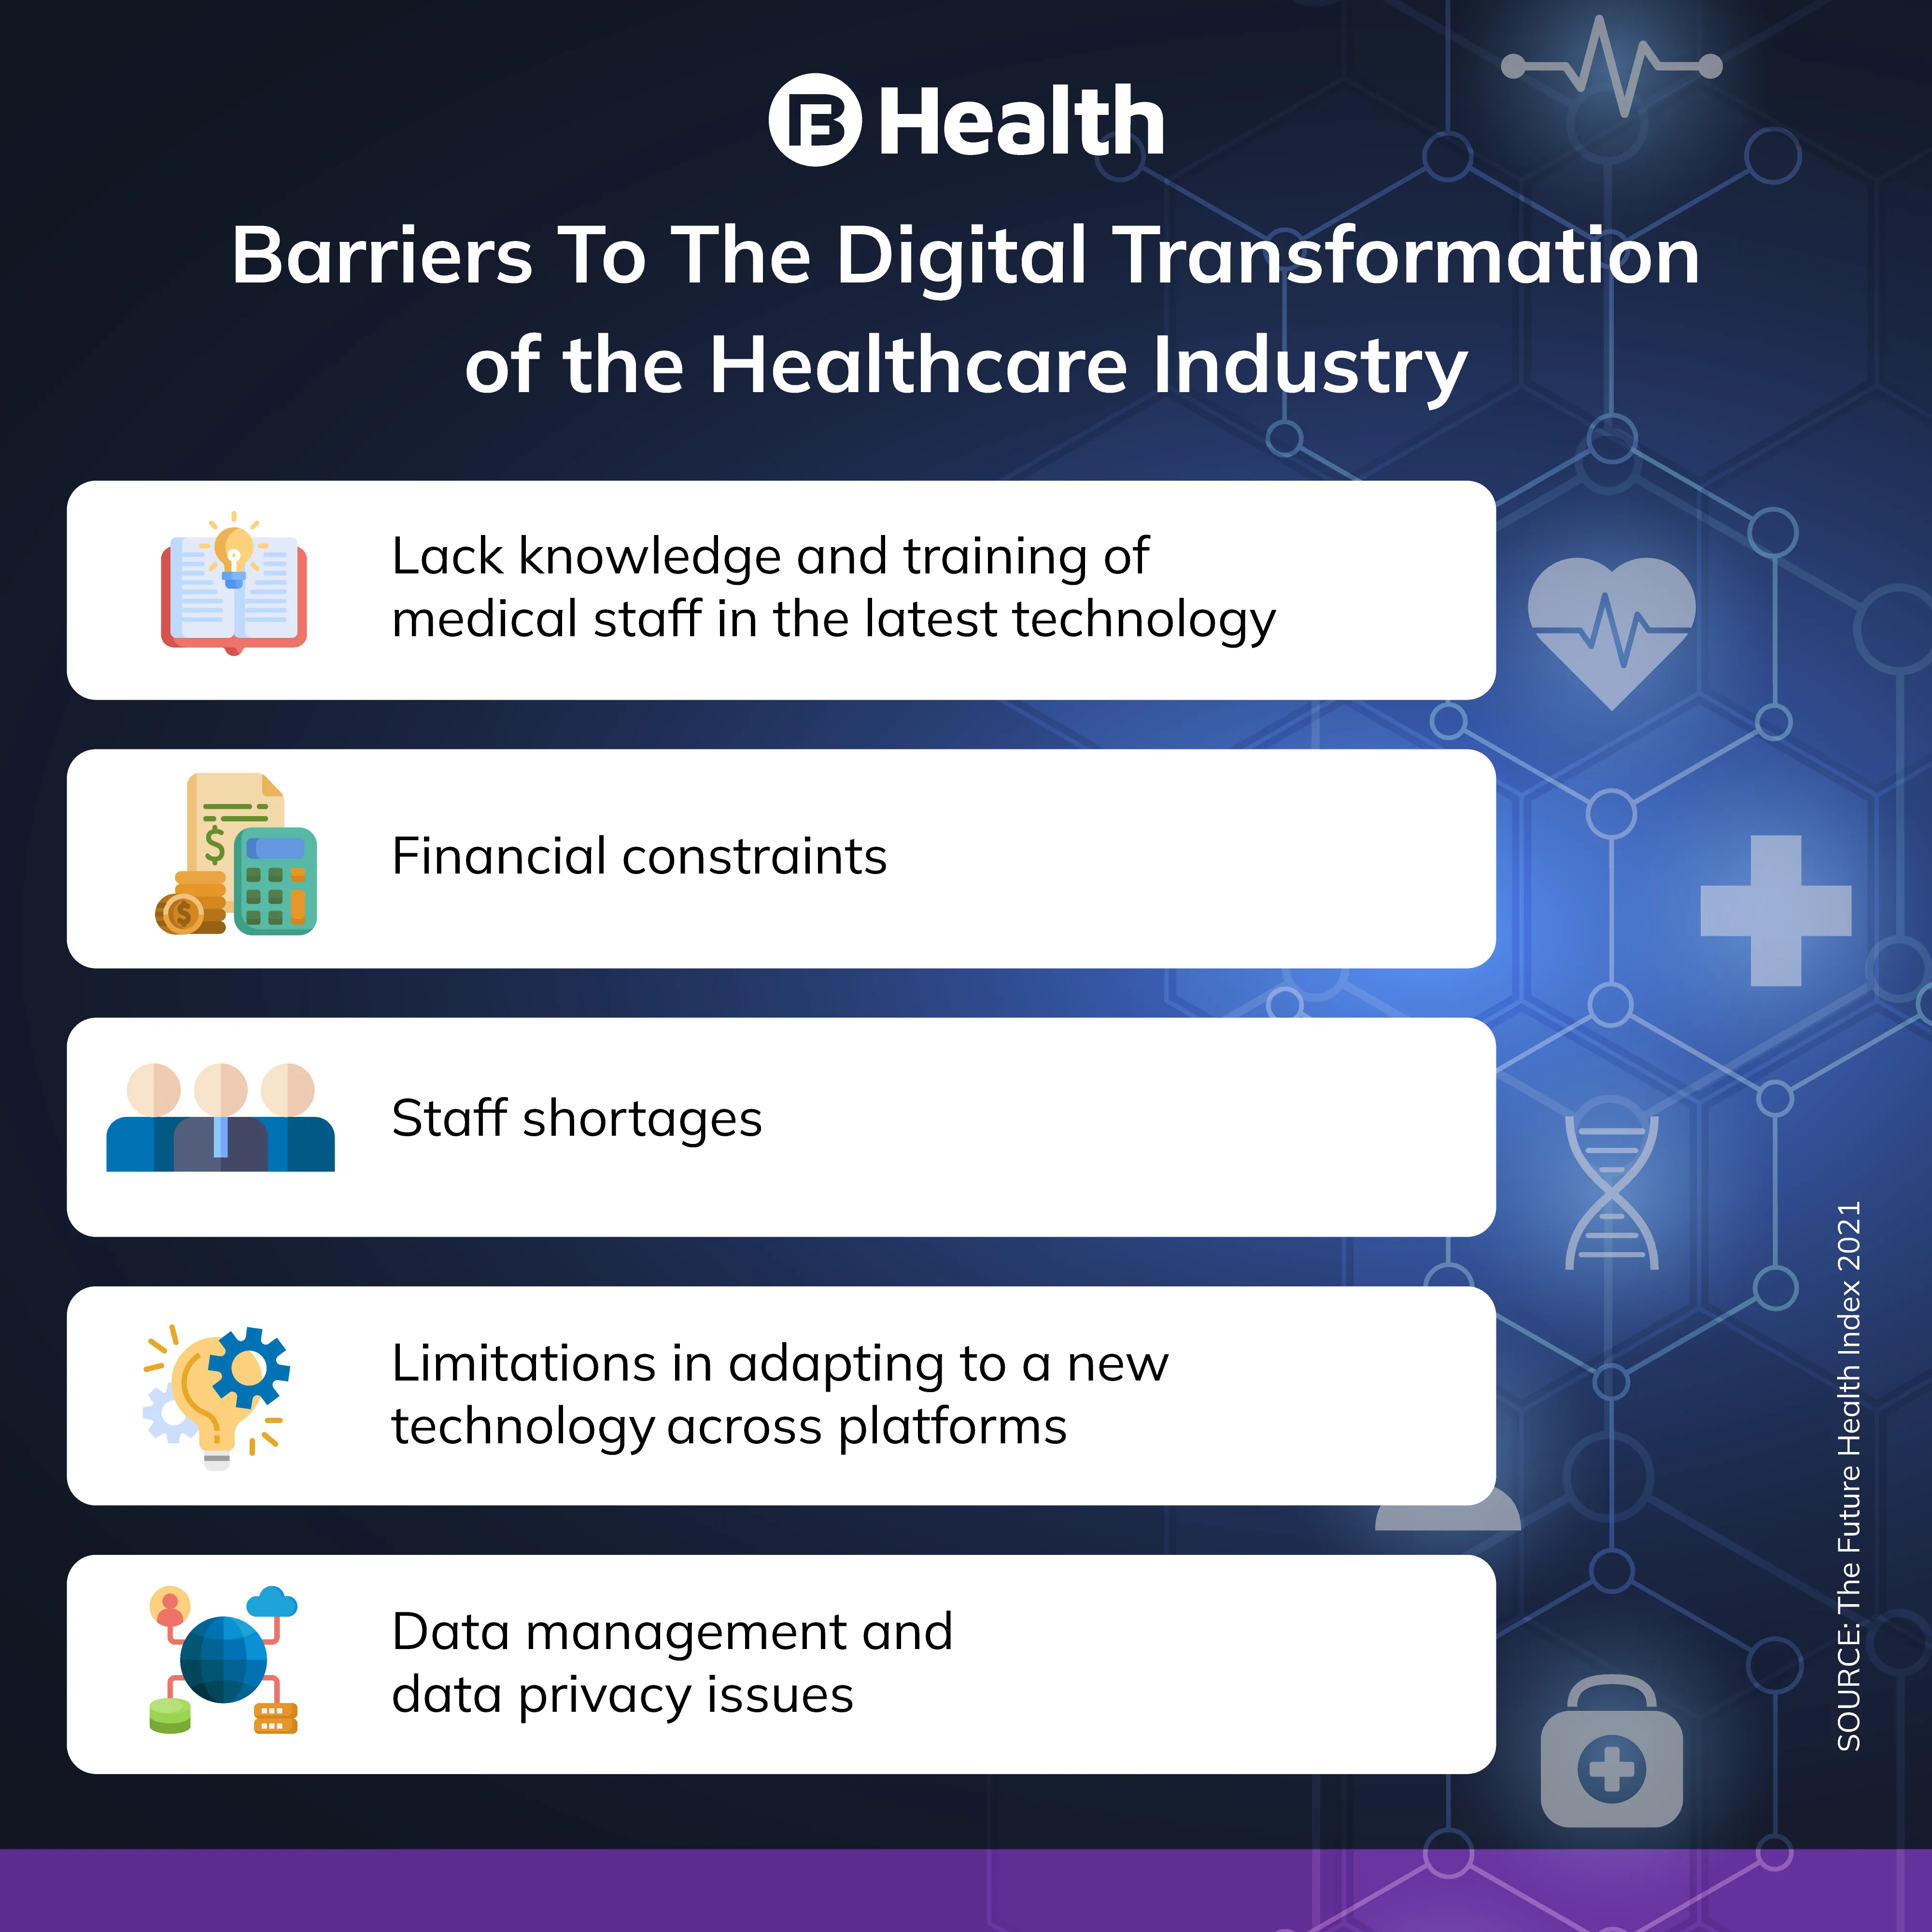 Barriers to Digital Transformation of Healthcare Industry